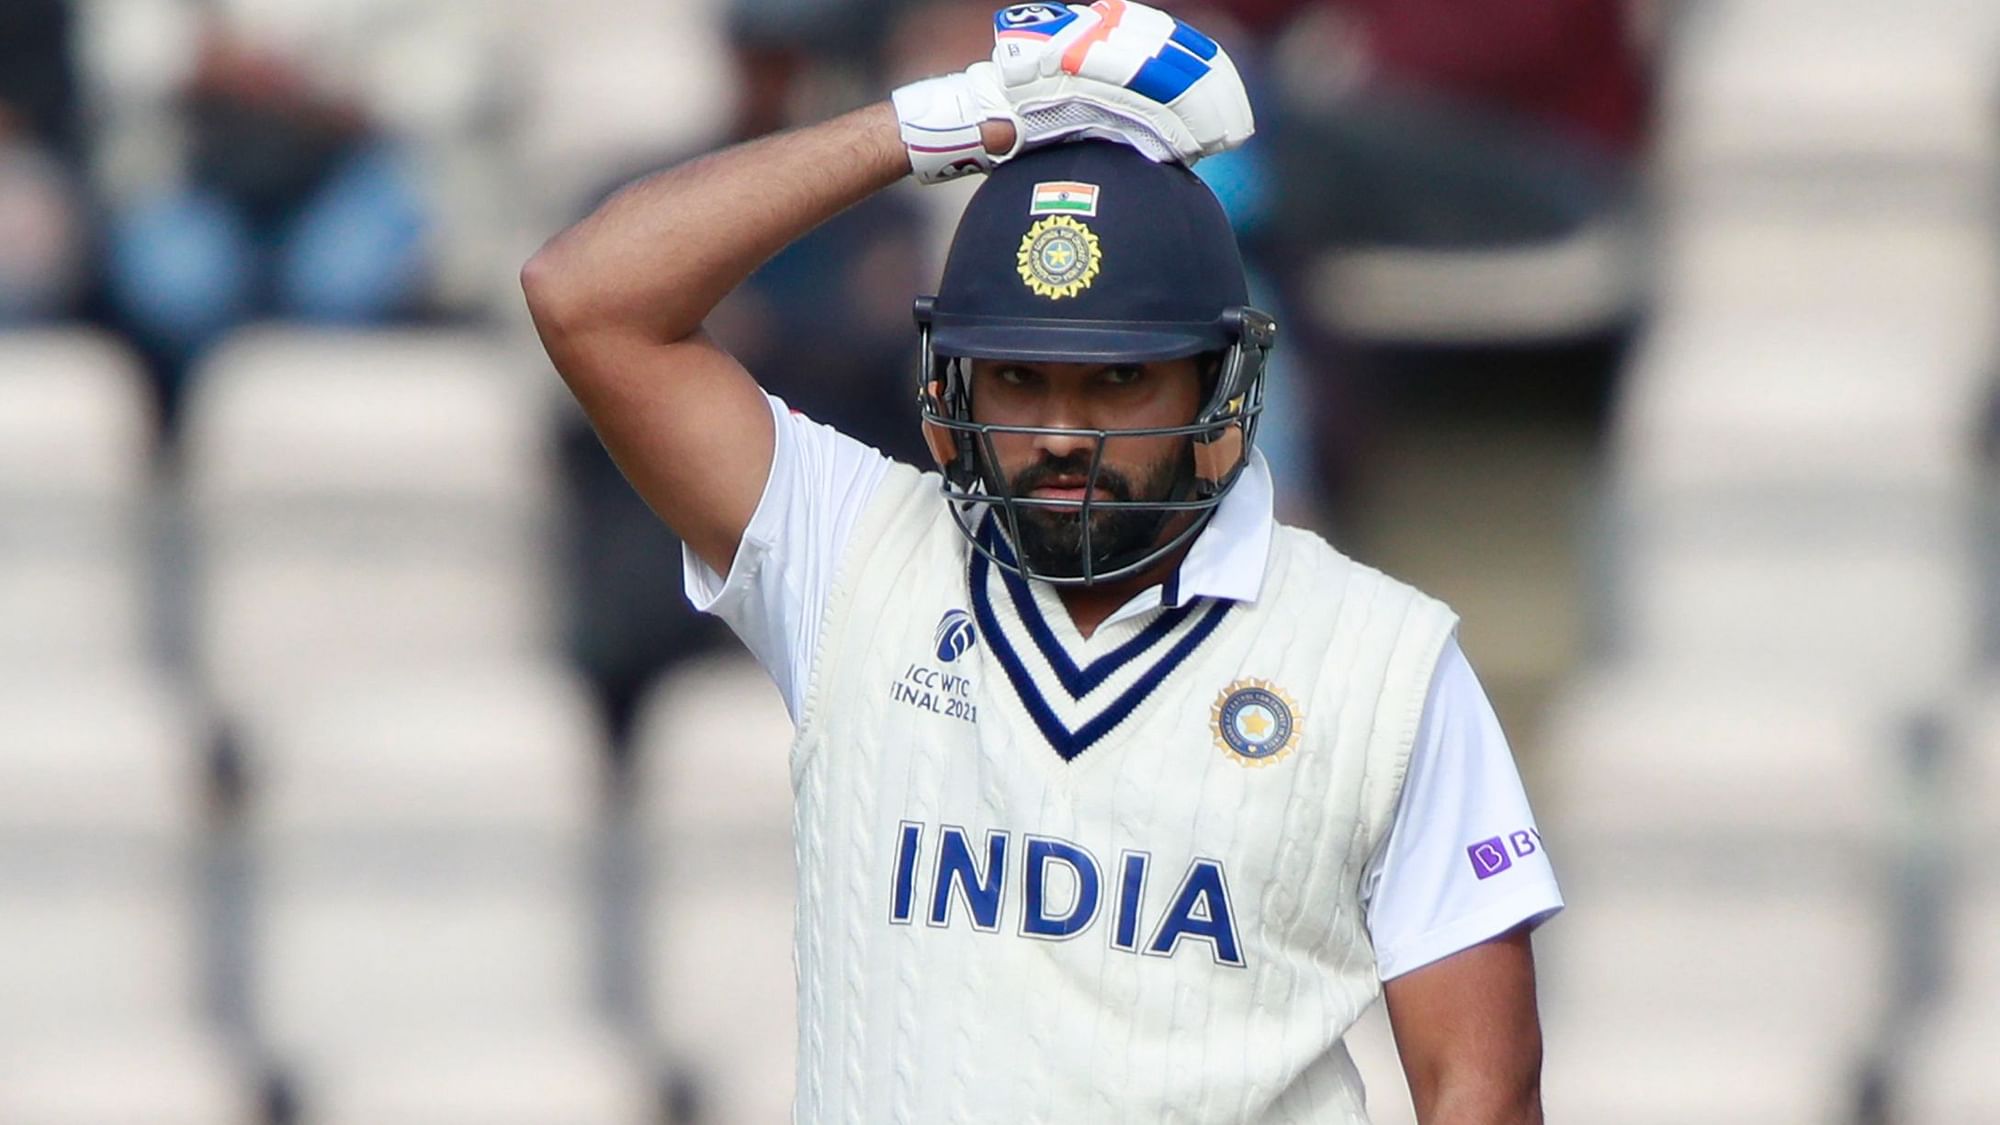 Rohit Sharma got out on an 81-ball 30 on Day 5 of the WTC final.